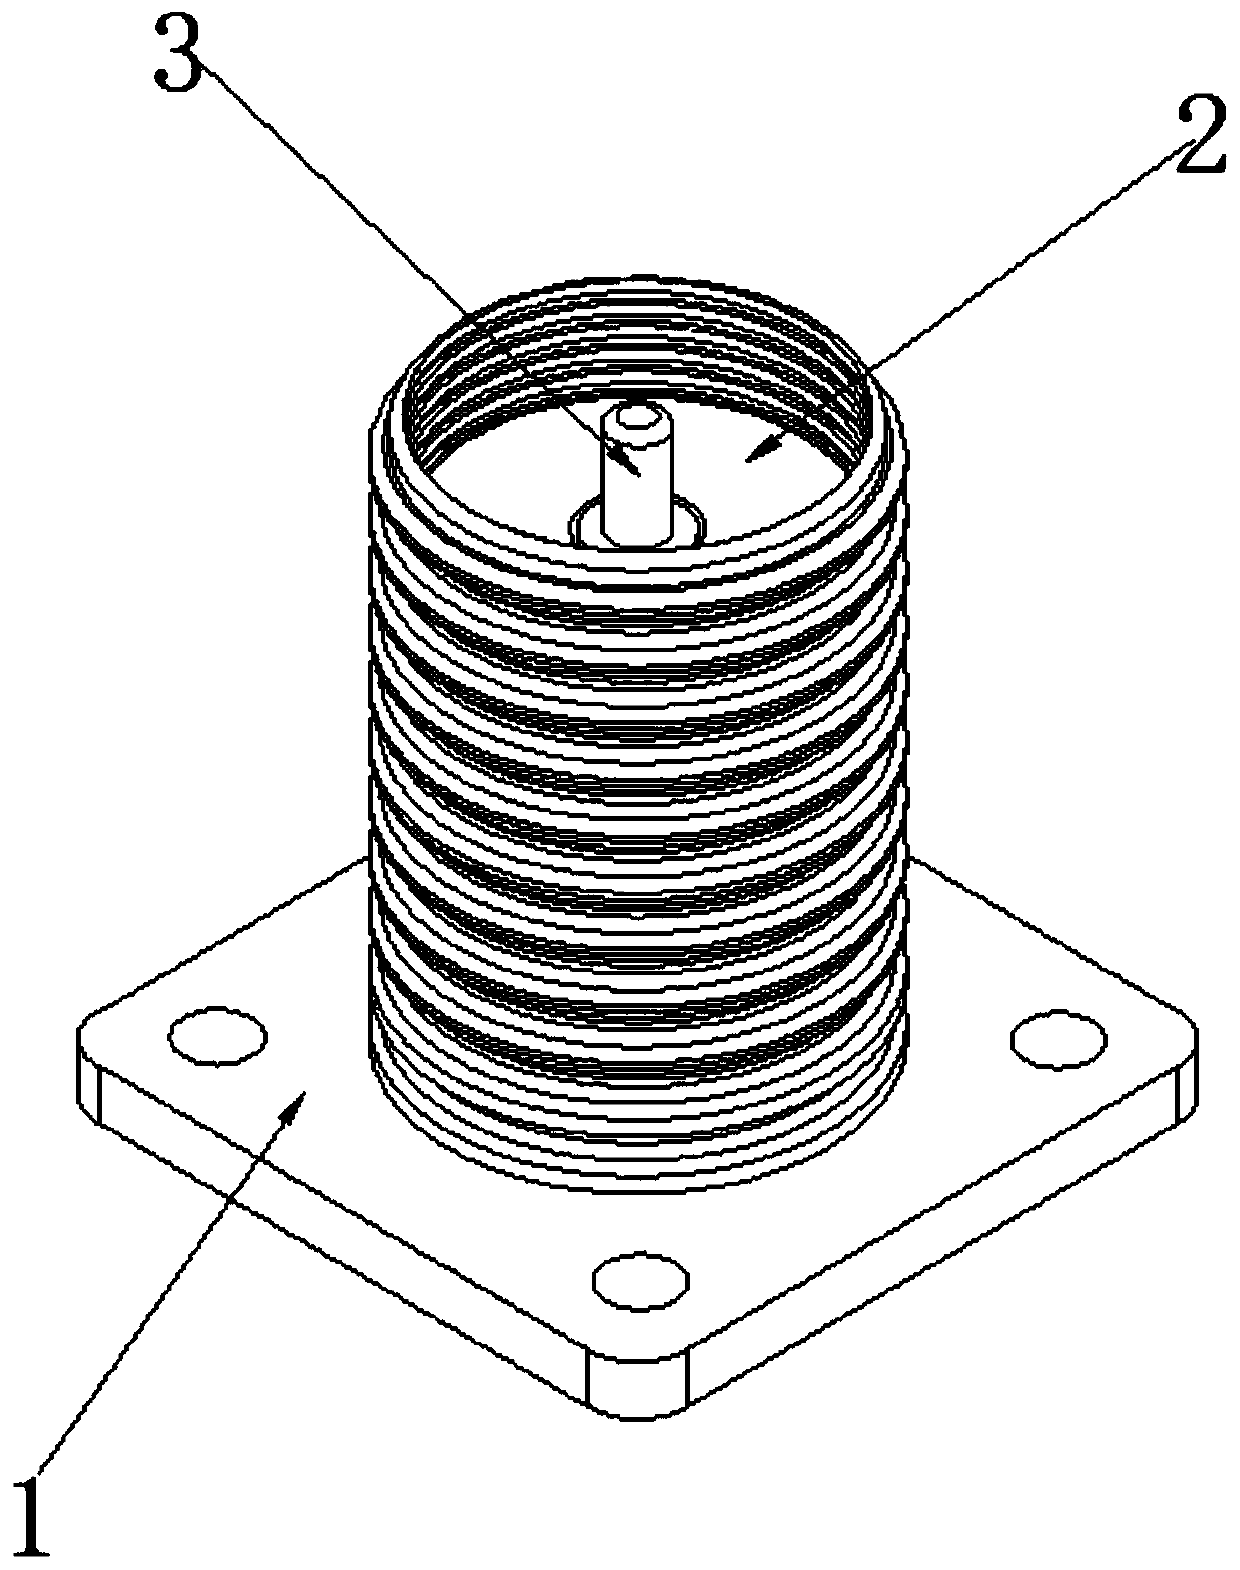 Production process of radio frequency coaxial connector for antenna connection